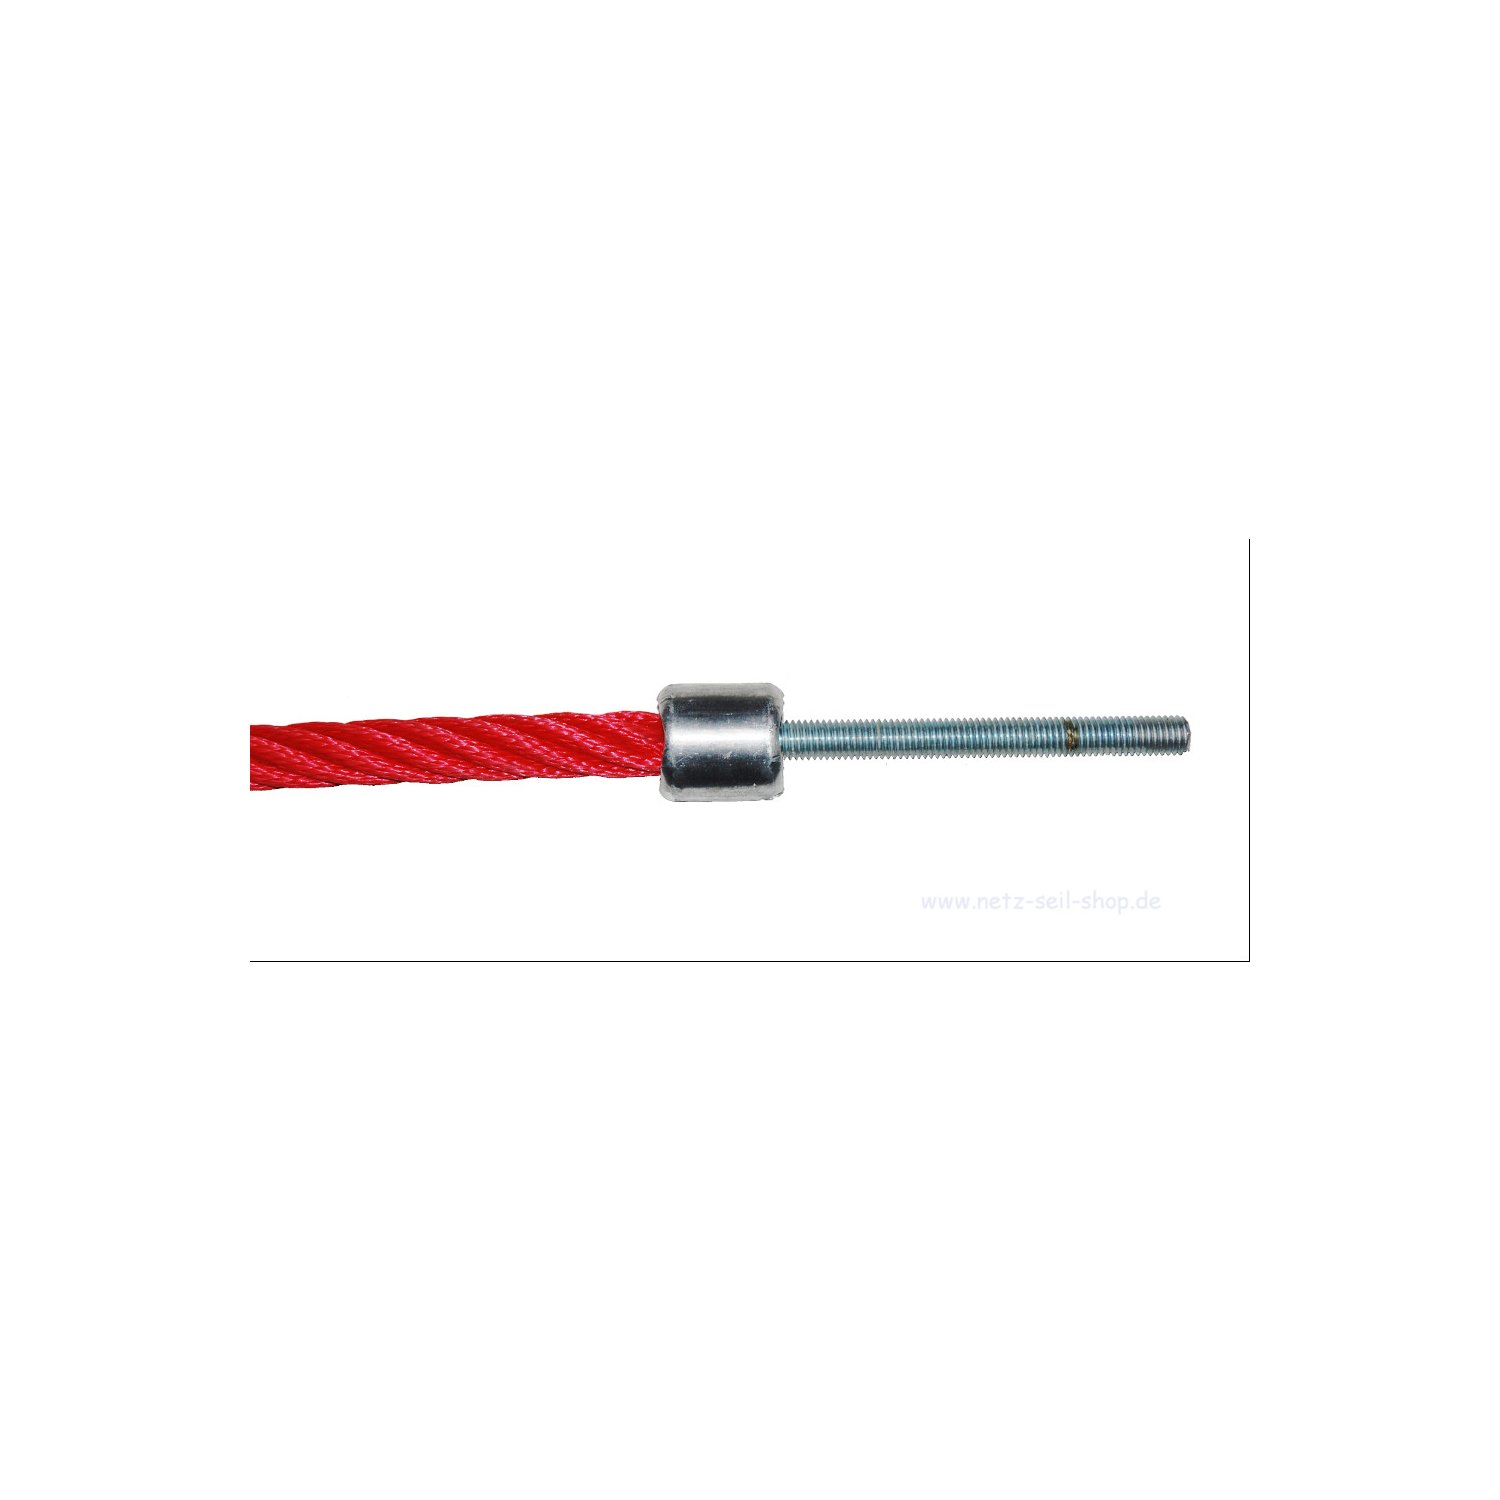 Threaded bolt M12 x 120 mm, galvanised, directly pressed [11,30 EUR]